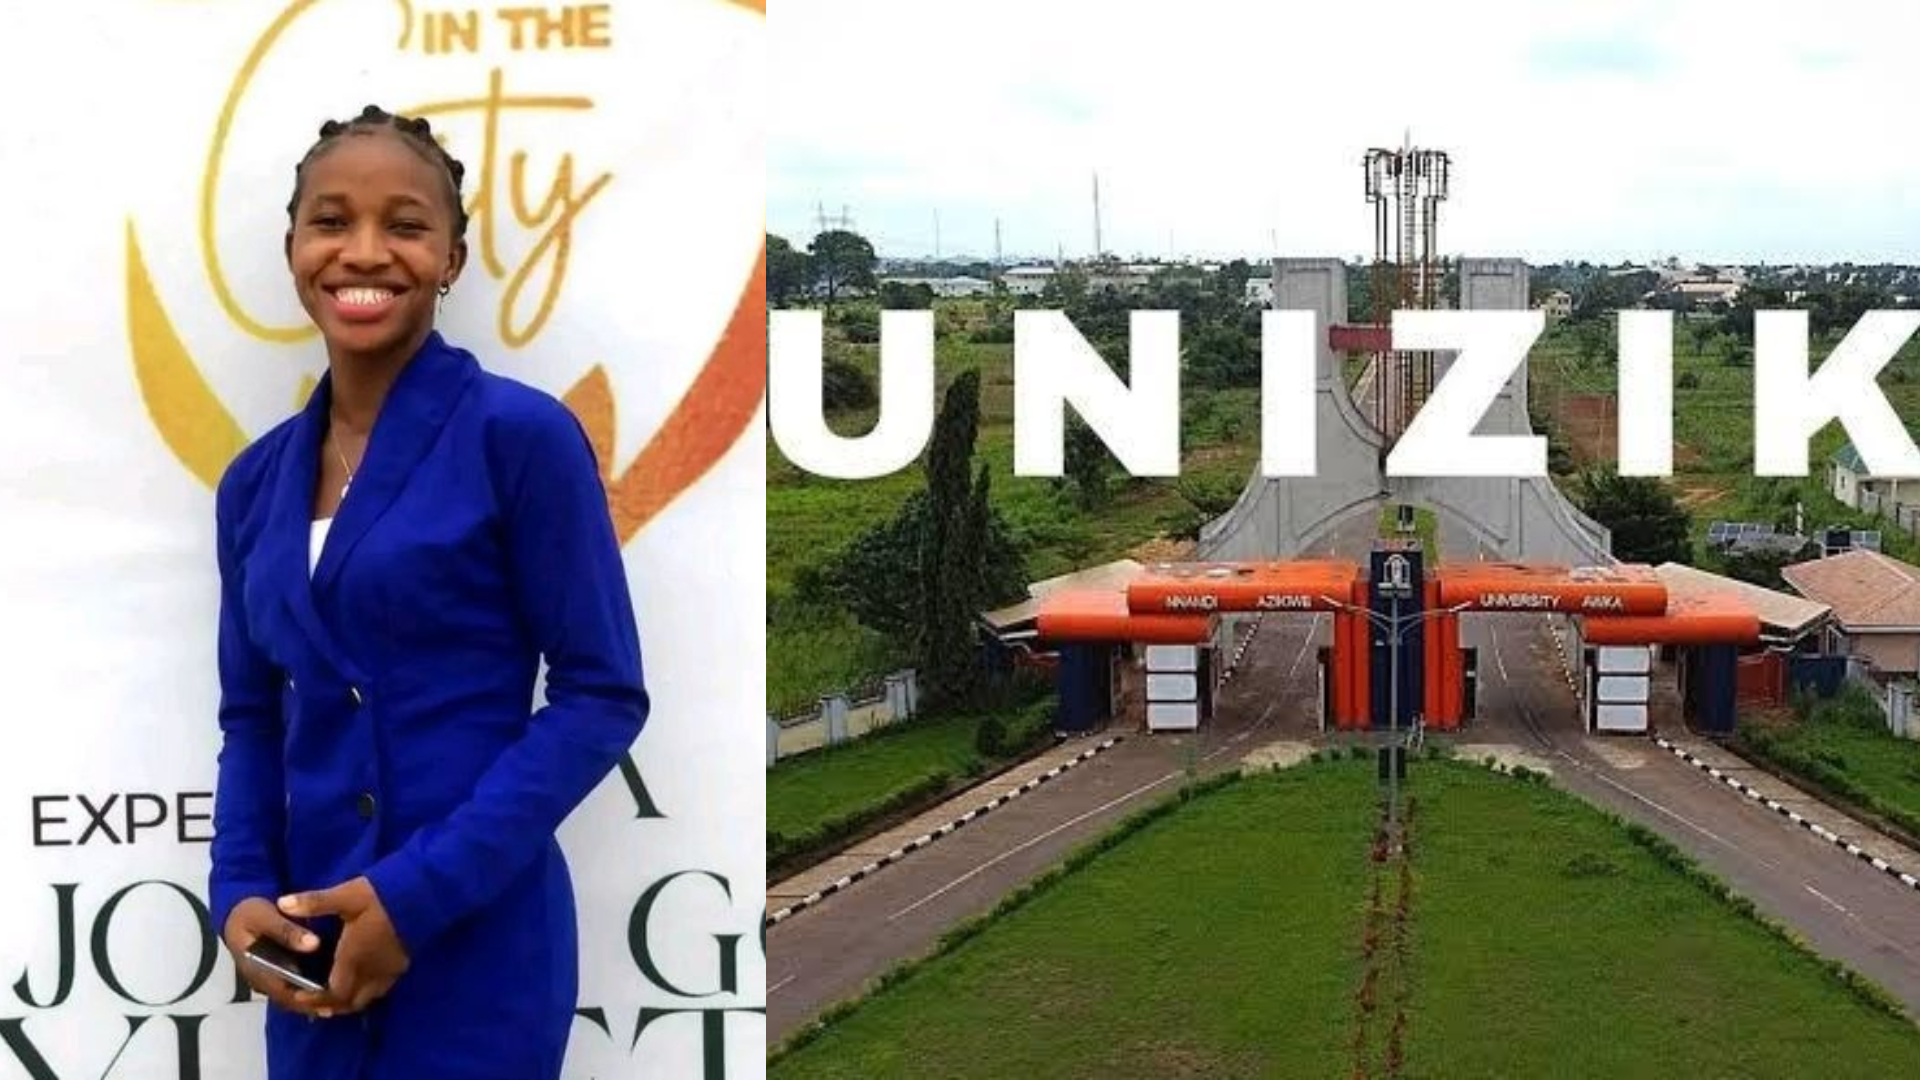 UNIZIK students gather funds together to raise N2M ransom for kidnapped colleague